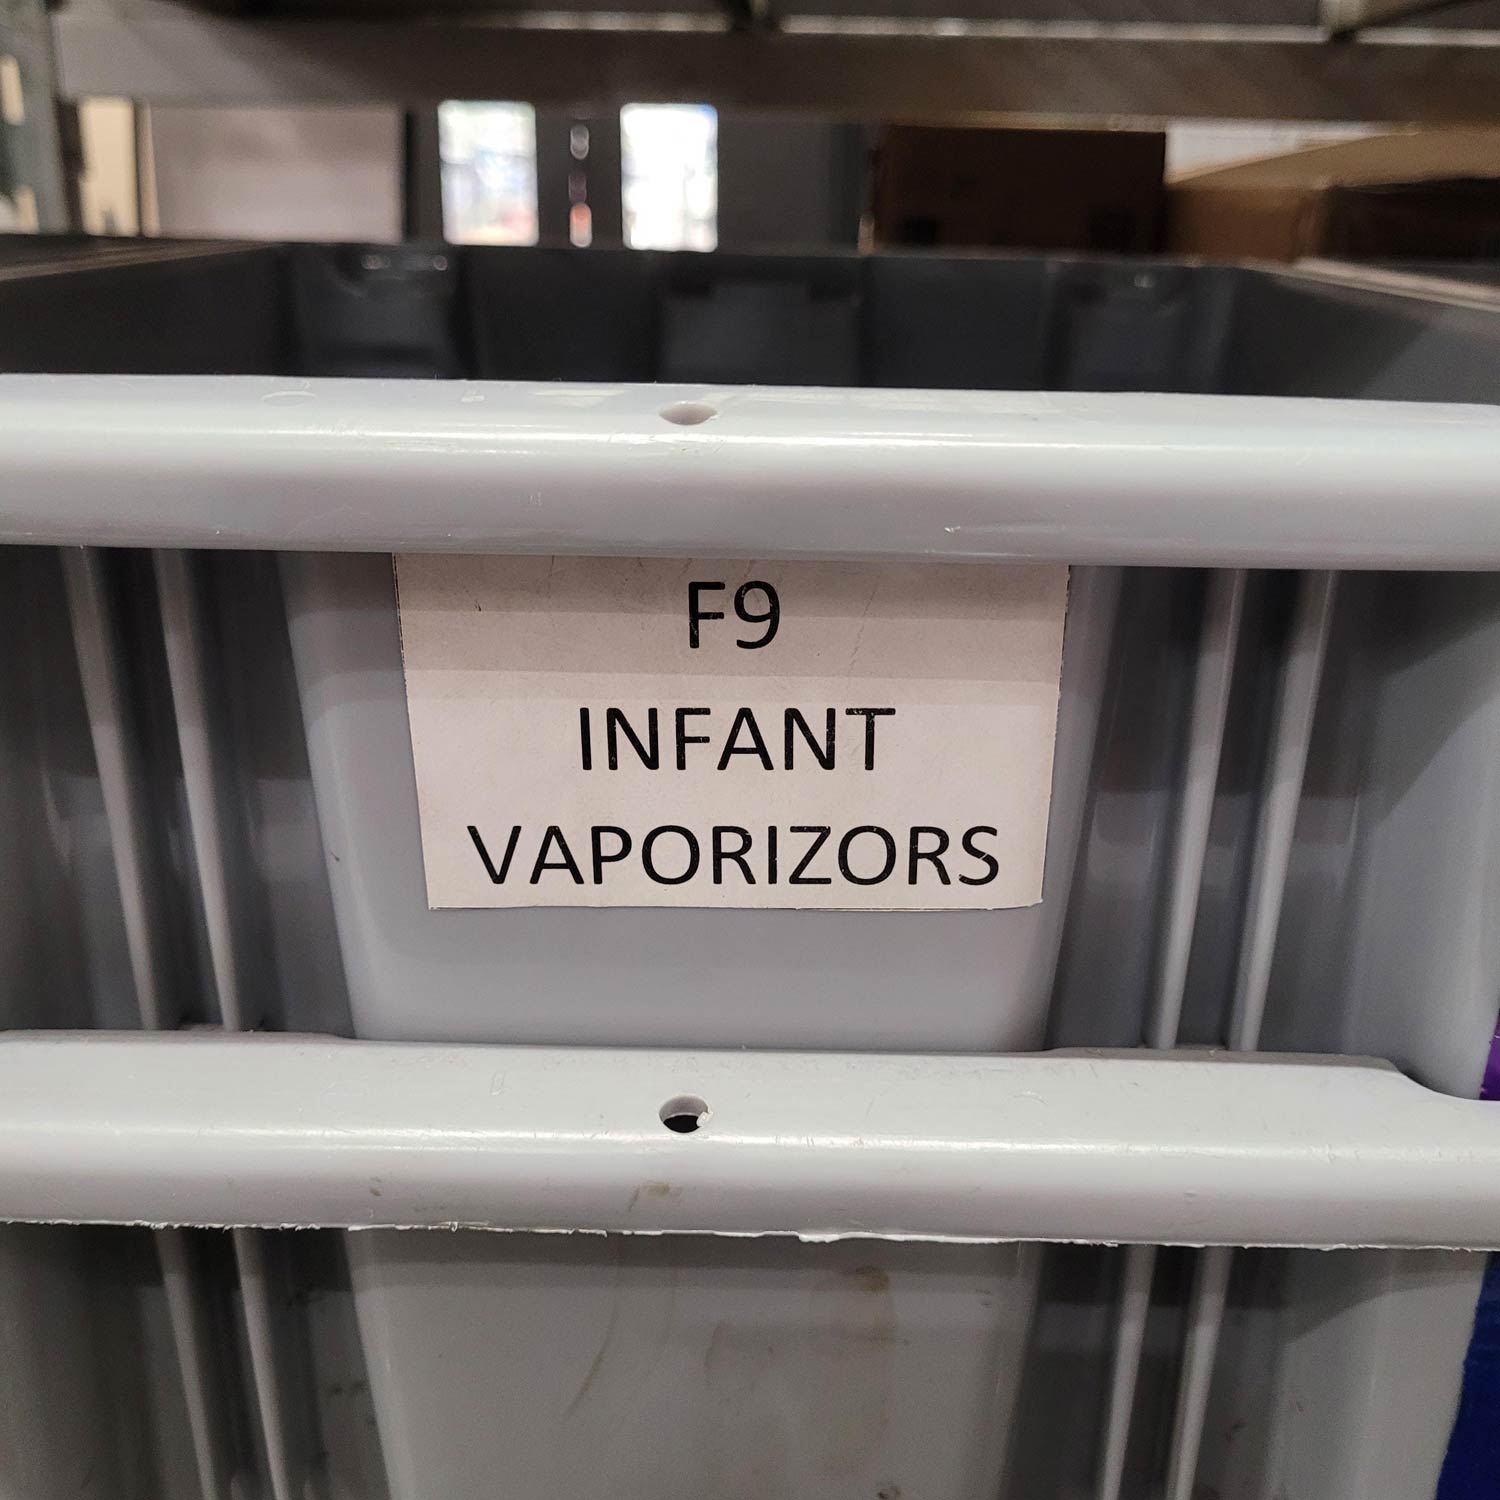 Finally, a new weapon in our war against infants!